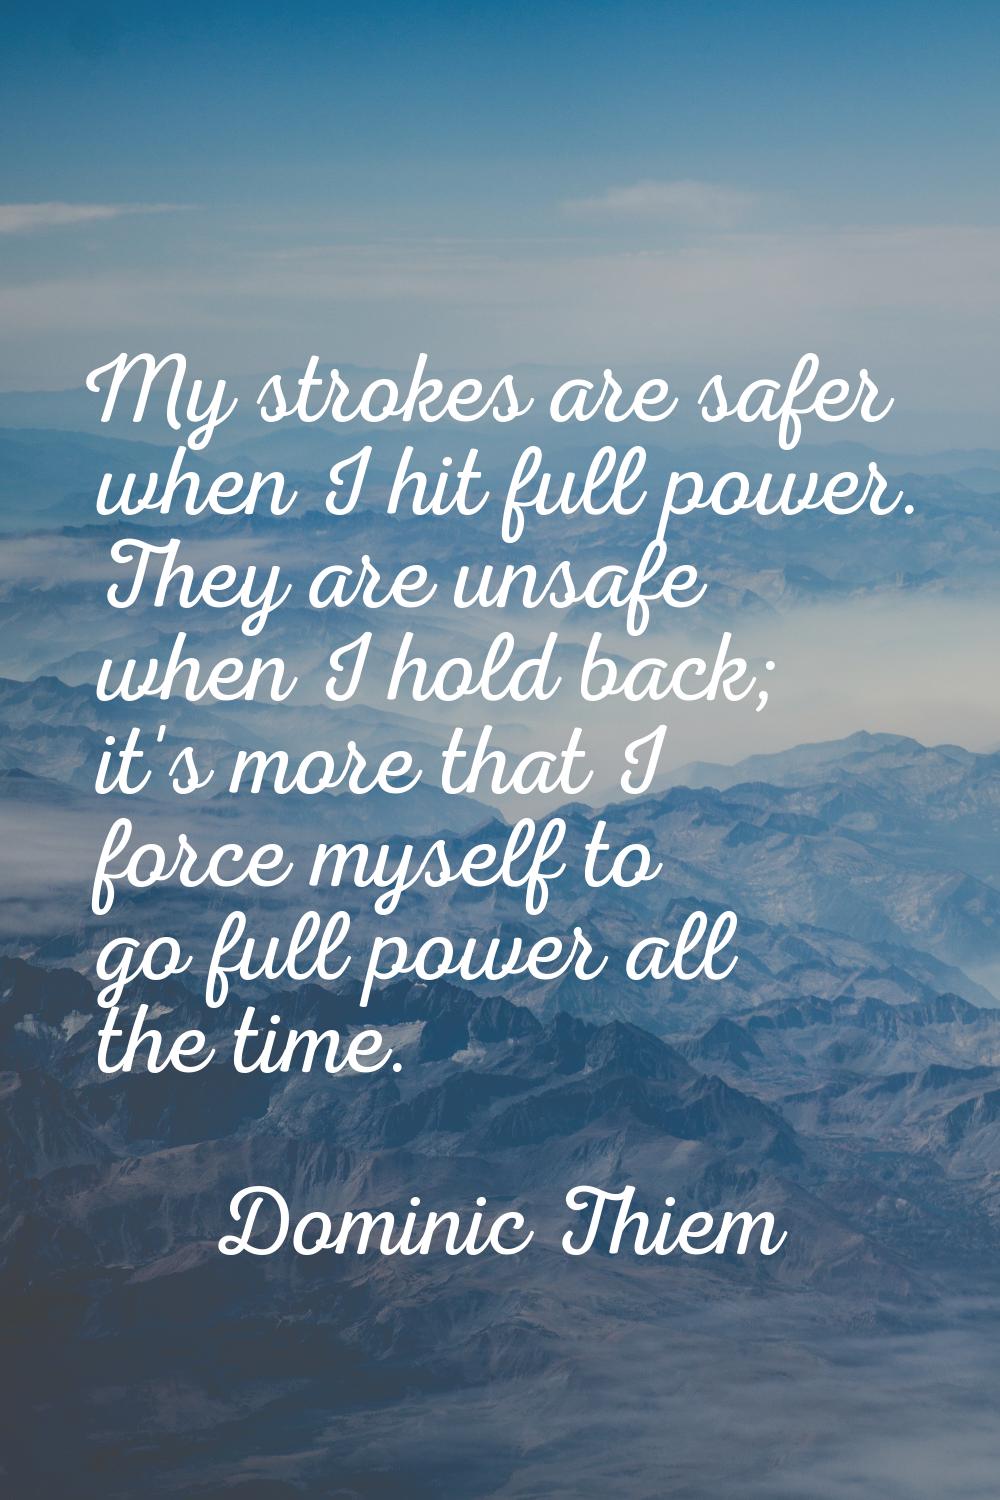 My strokes are safer when I hit full power. They are unsafe when I hold back; it's more that I forc